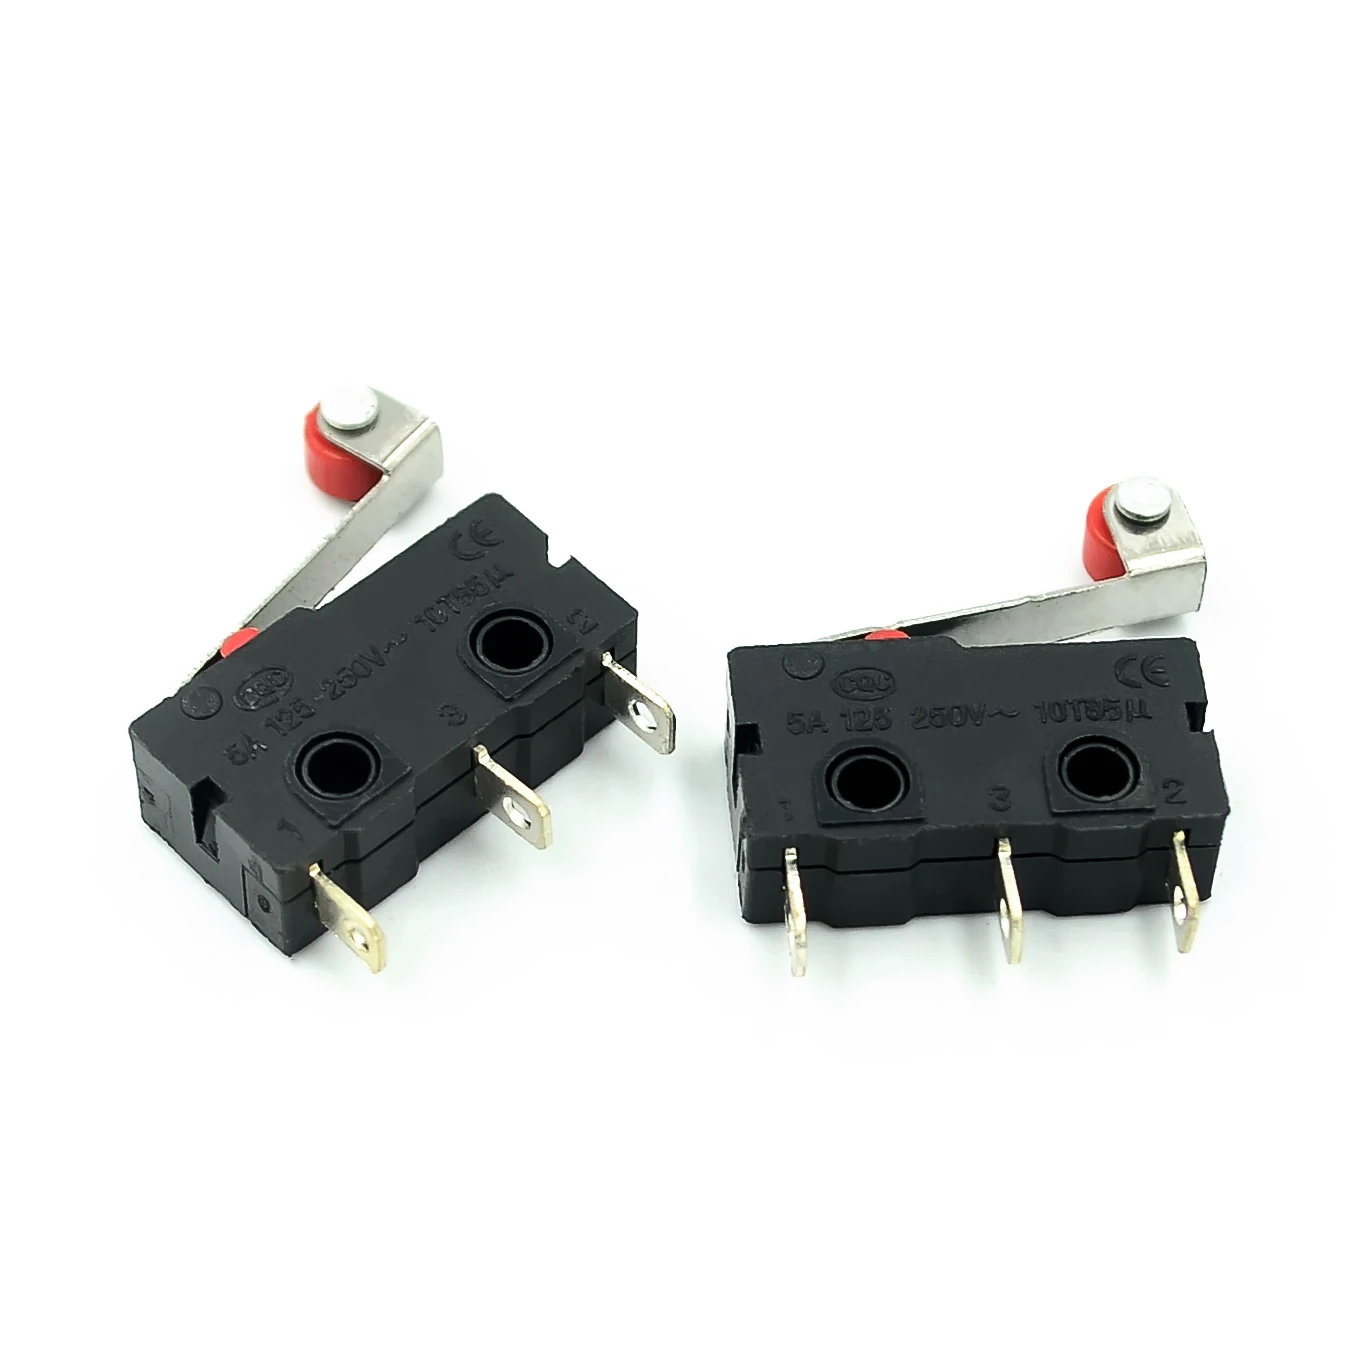 5PCS KW12 KW12-3 Micro Roller Lever Arm Normally Open Close Limit Switch 